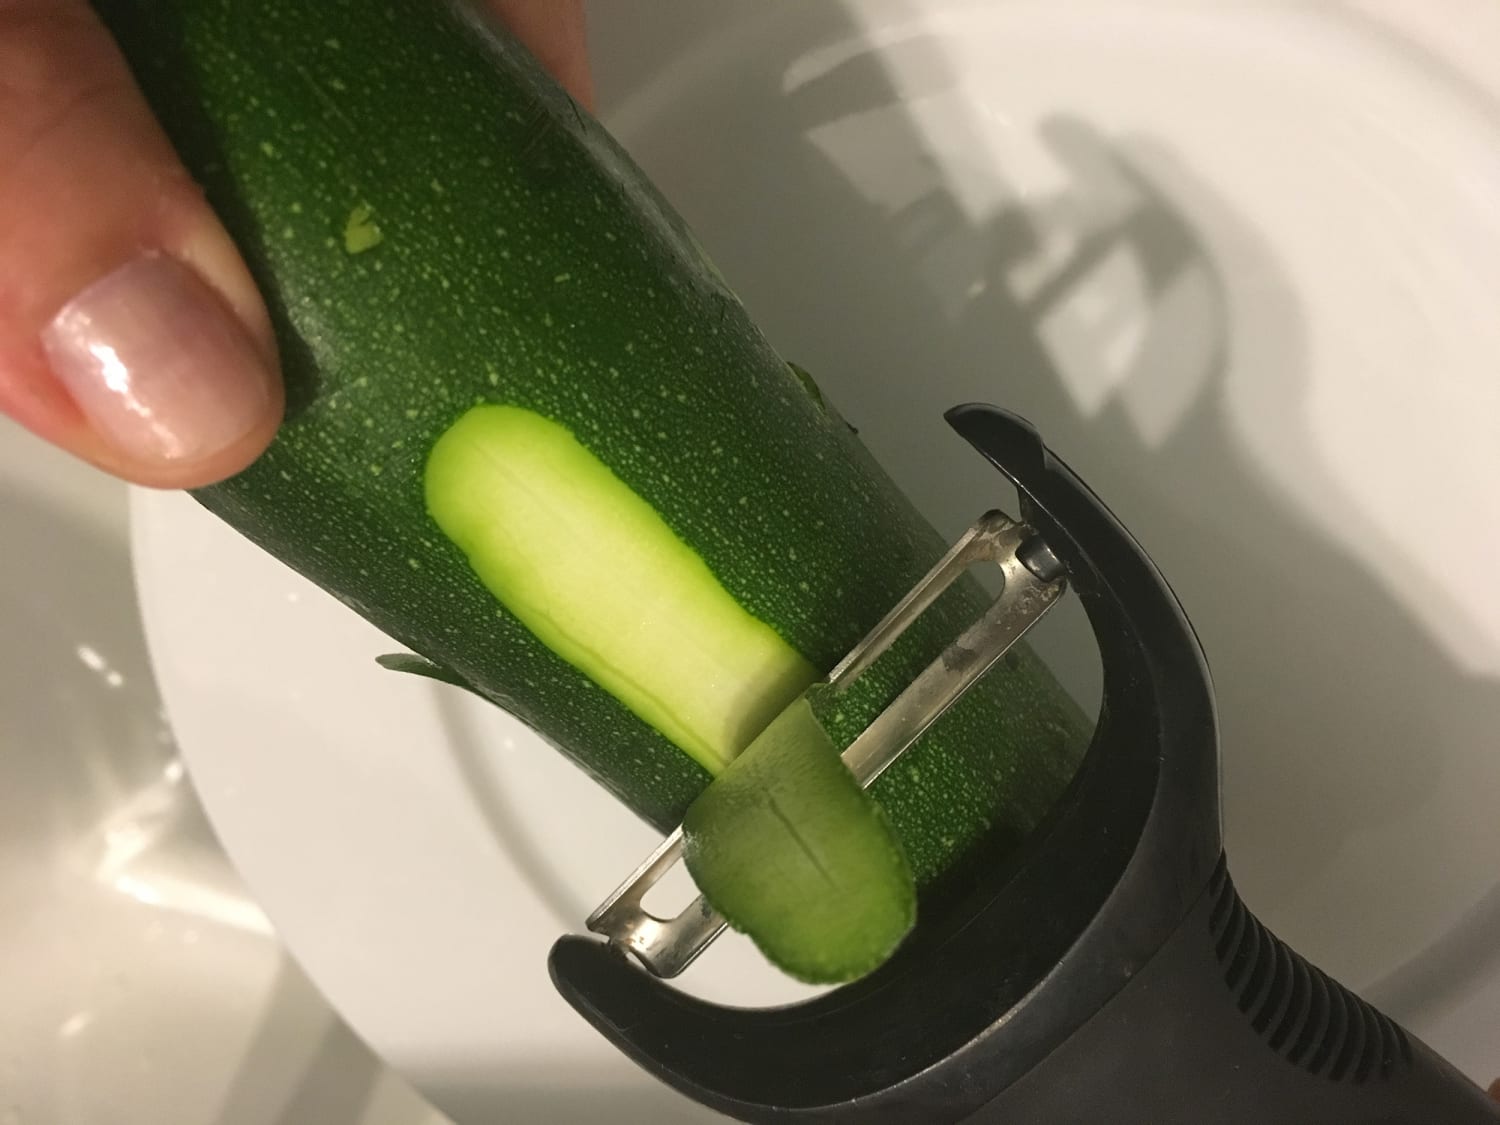 This $9 peeler is still perfect after 10 years and has 5 stars on